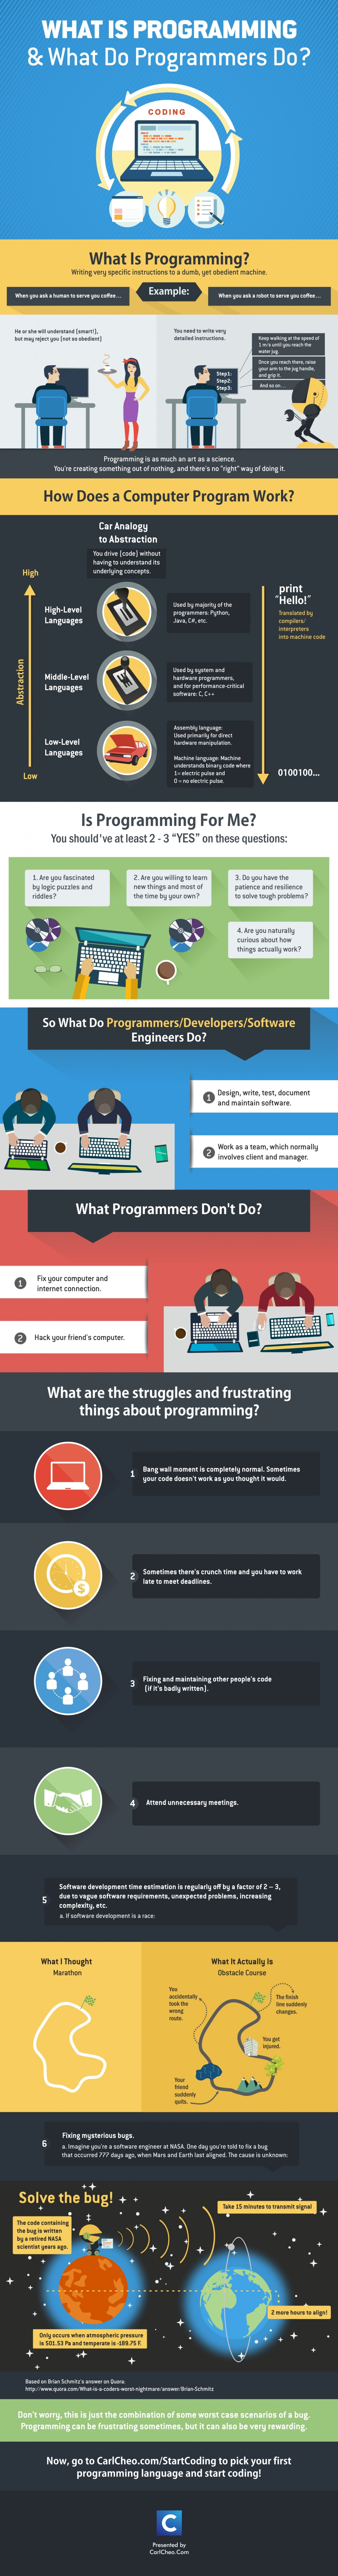 What Is Programming And What Do Programmers Do? Infographic